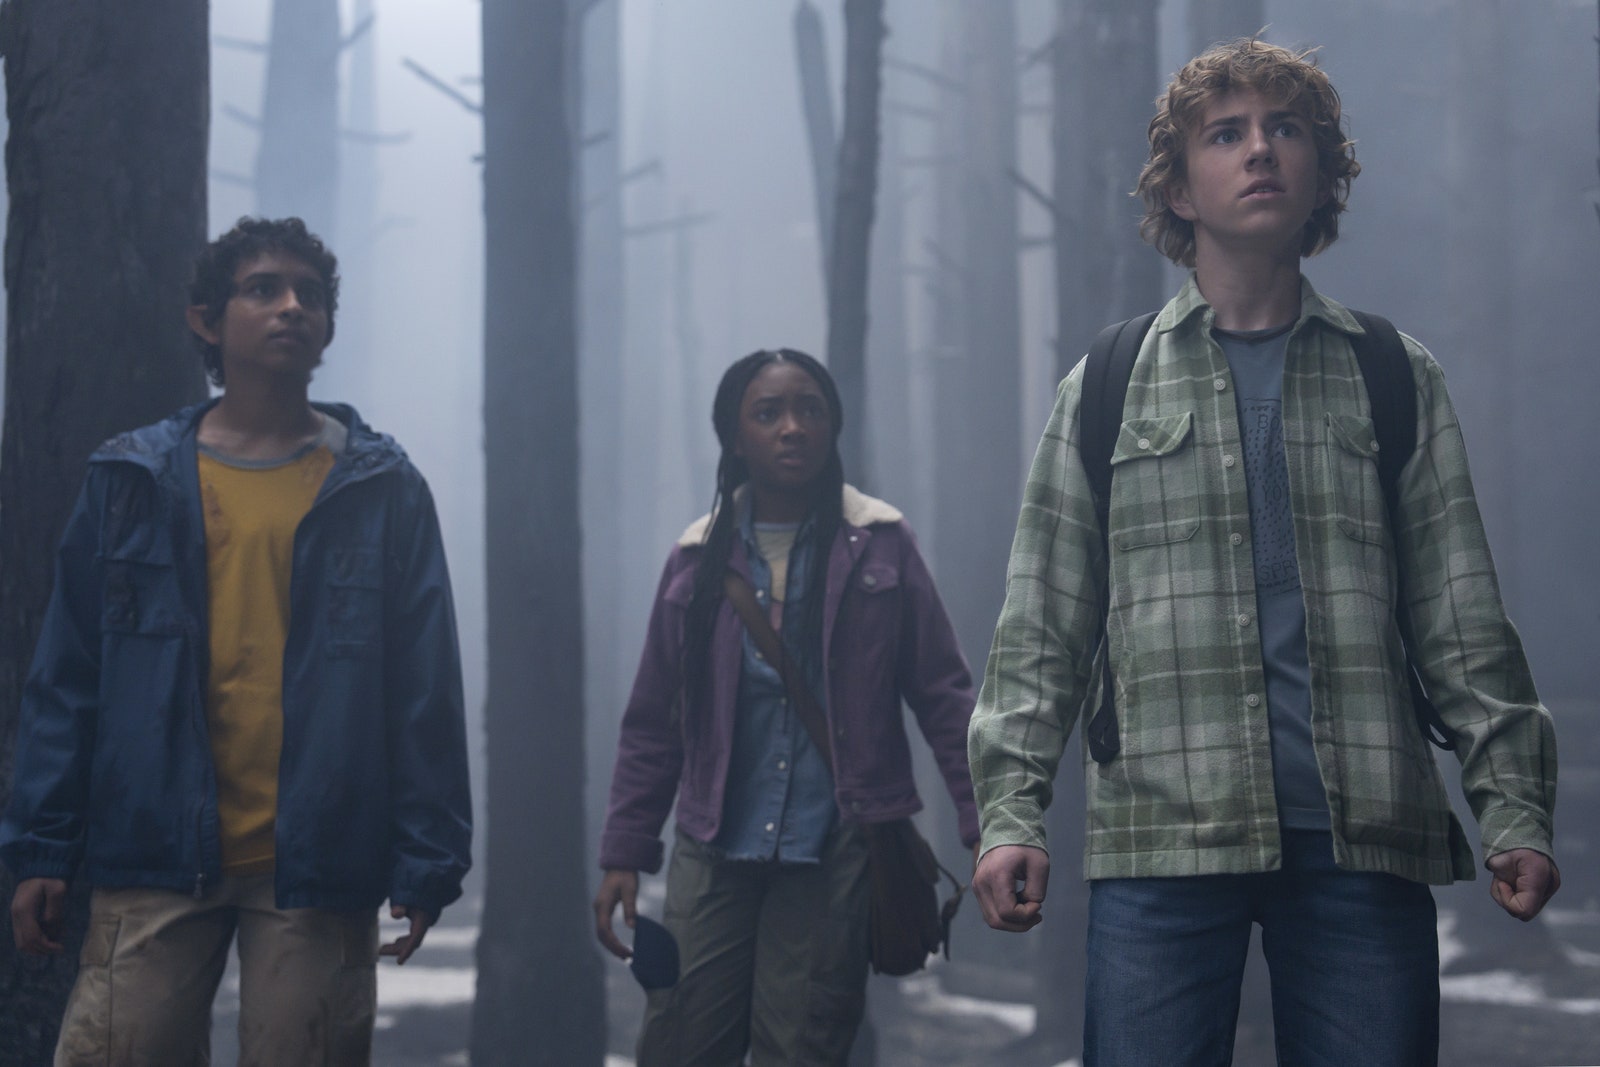 Percy Jackson trio of friends in the woods